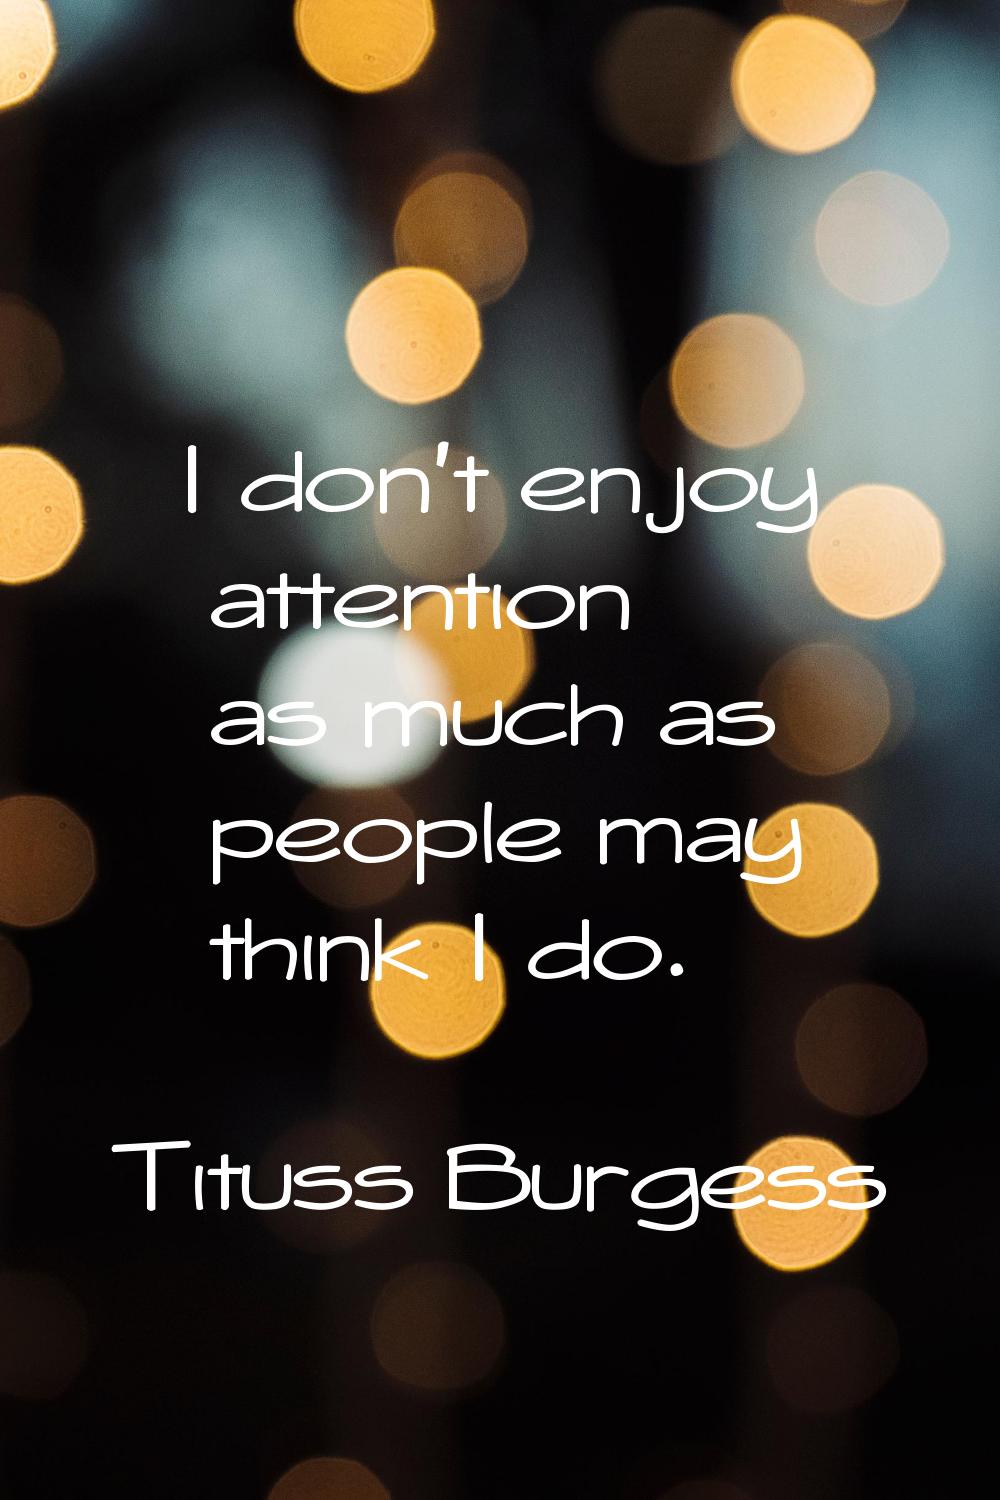 I don't enjoy attention as much as people may think I do.